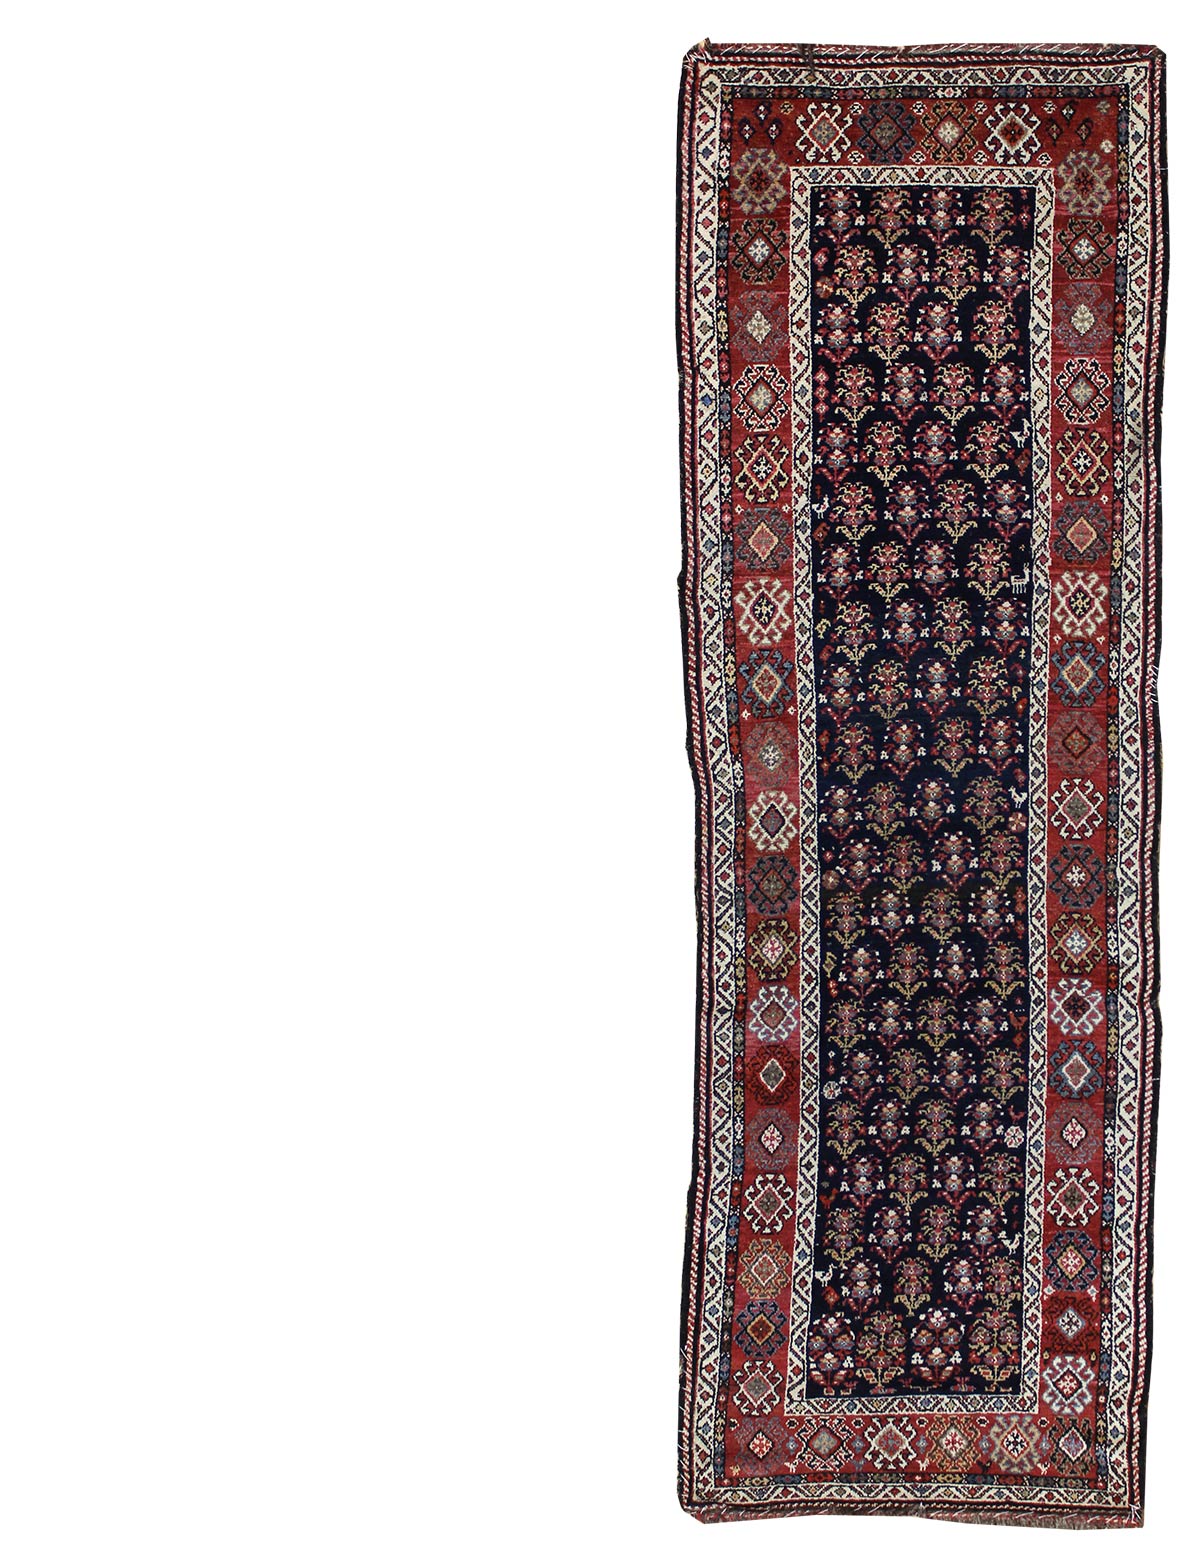 Antique N.W. Persian Handwoven Tribal Rug